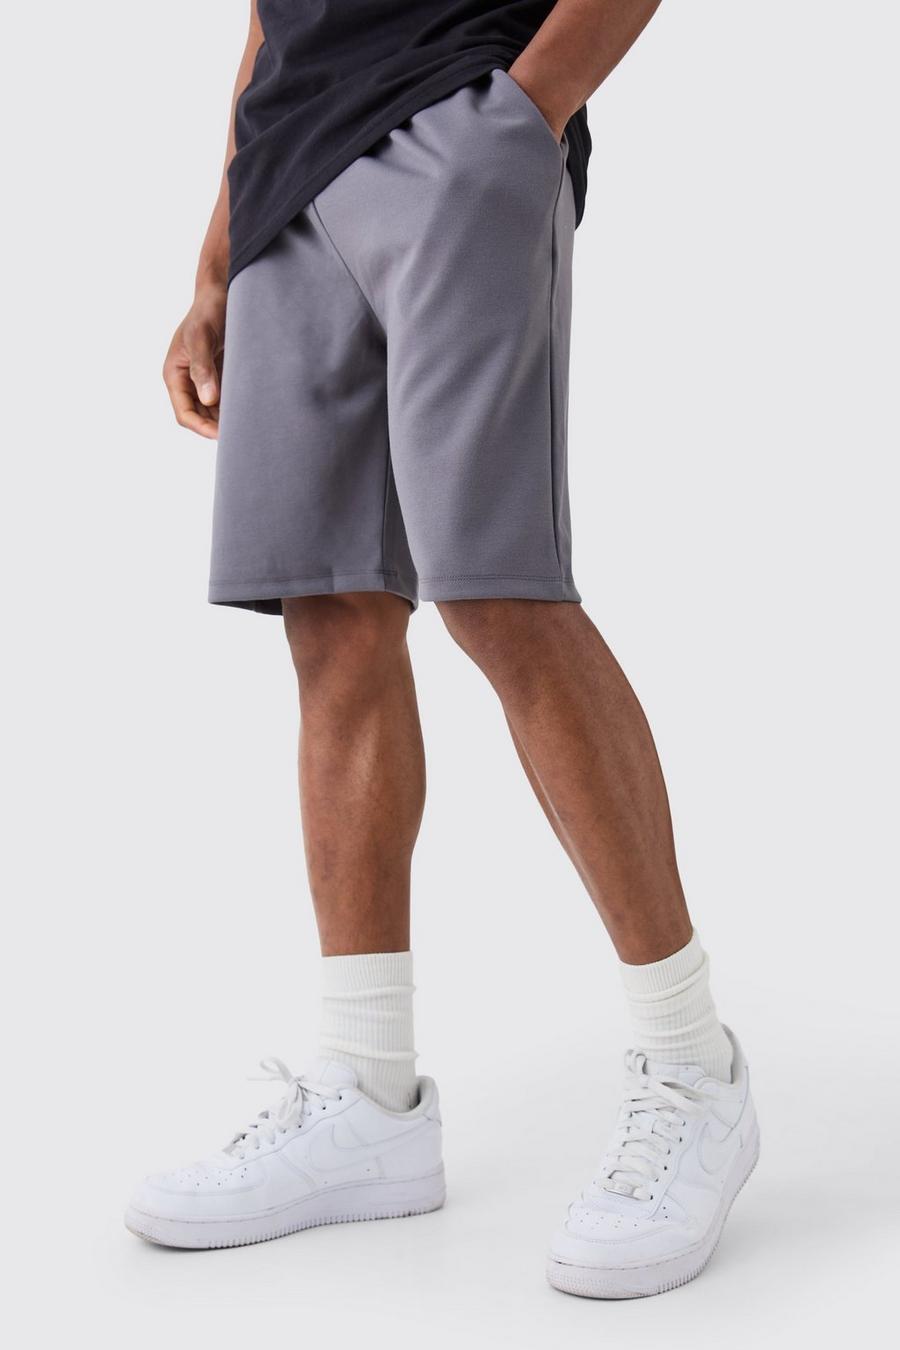 JERSEY LOUNGE MENS RELAXED SHORT